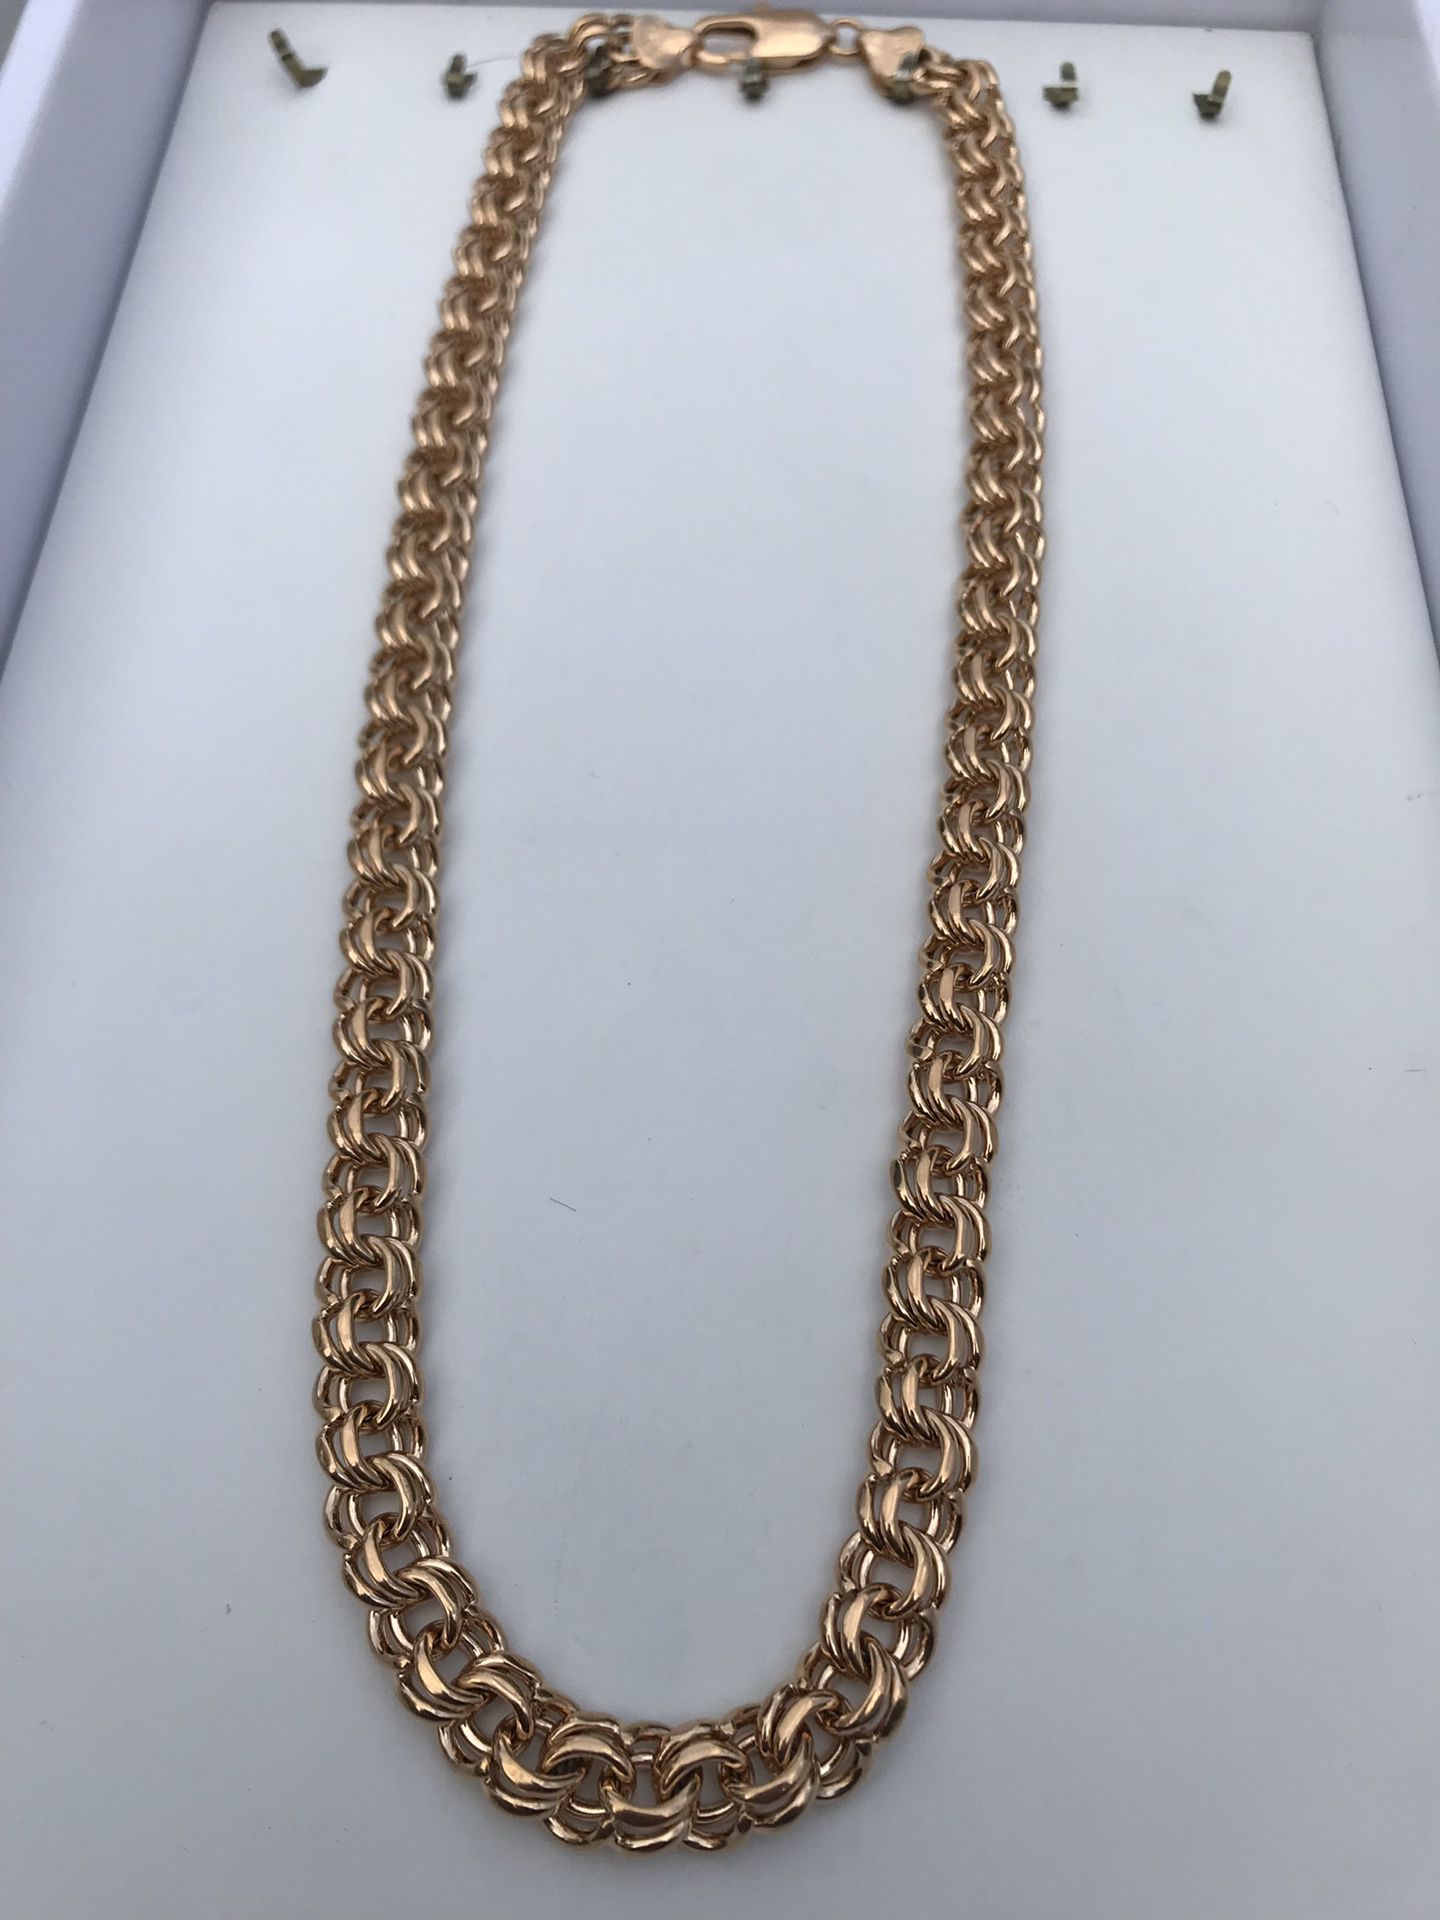 Louis vuitton blooming strass necklace basically brand new for Sale in The  Woodlands, TX - OfferUp